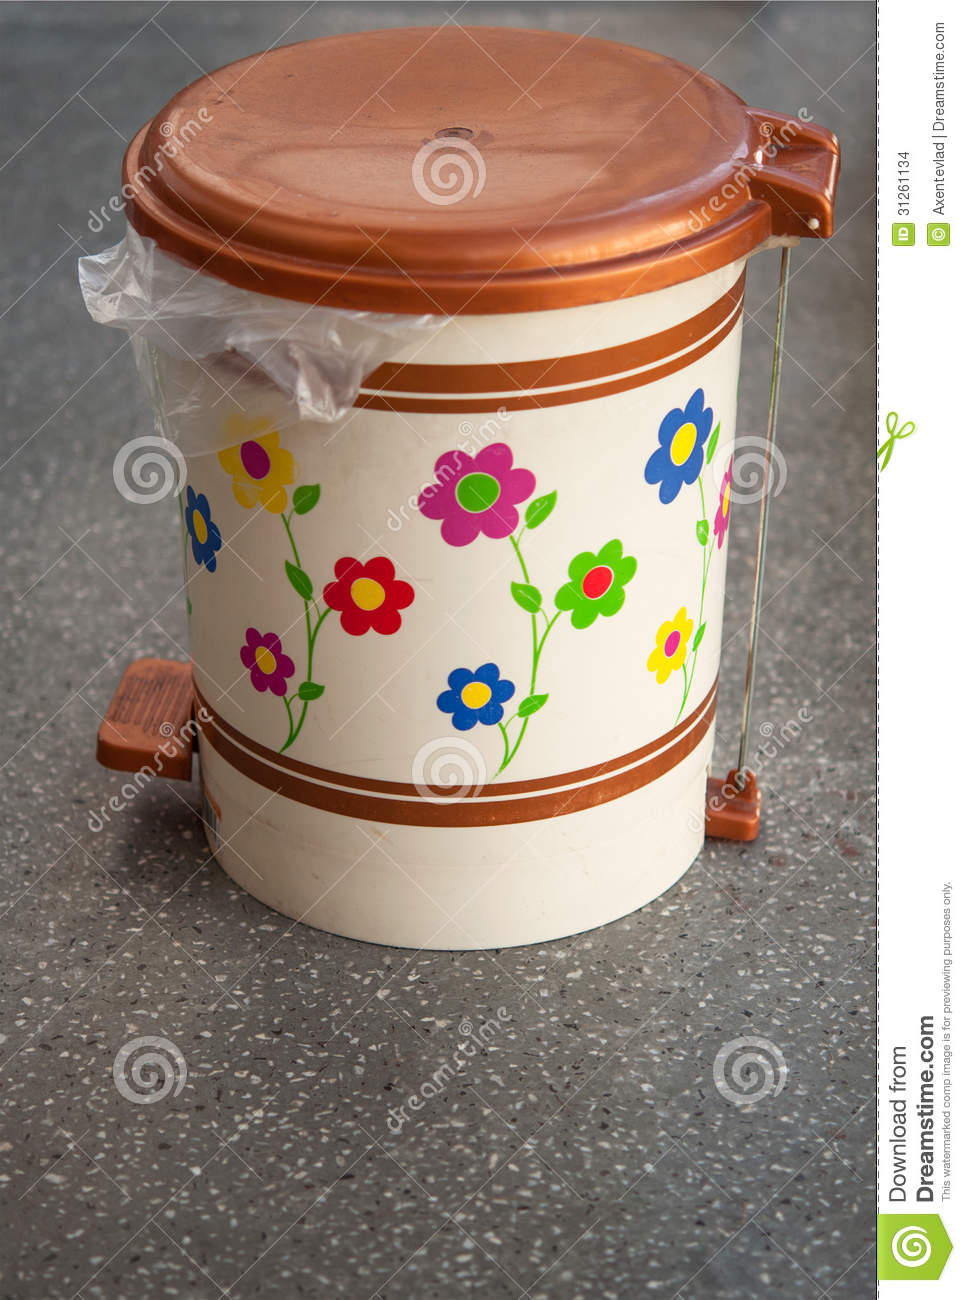 Colored Trash Can With A Plastic Bag Inside On Grey Stock Images    